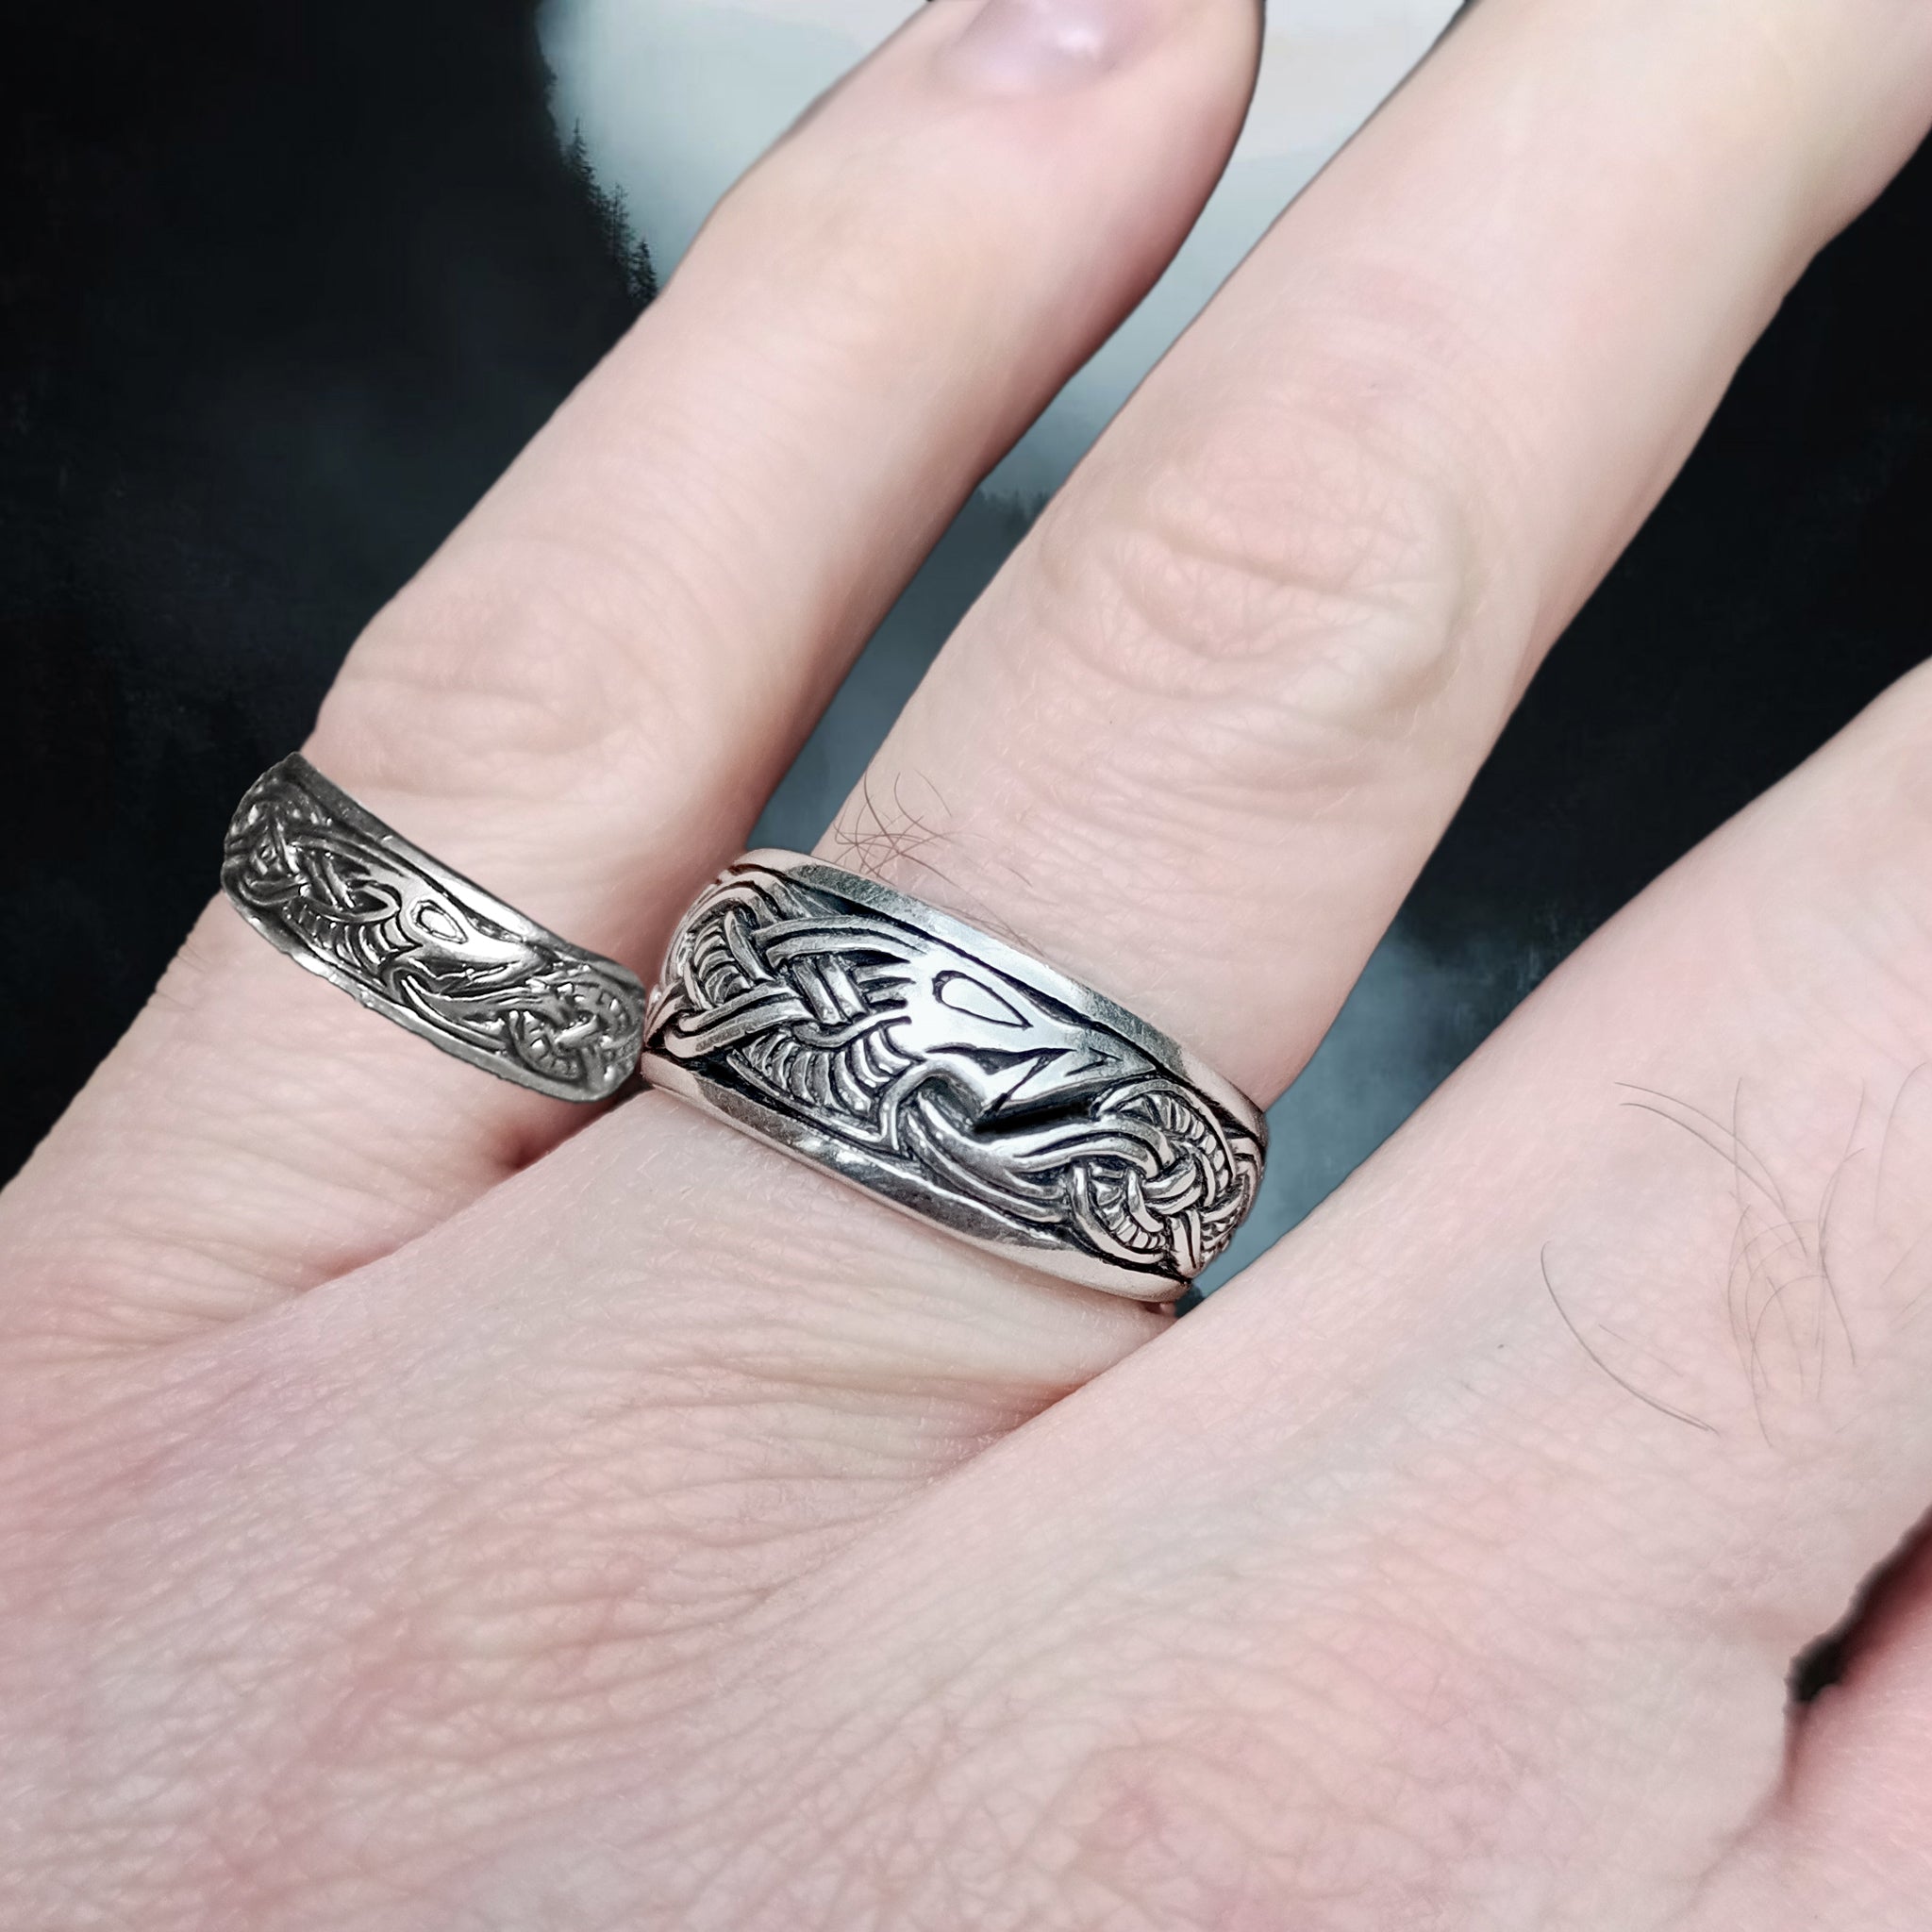 Silver Viking Dragon Rings in Small and Large Sizes - Viking Jewelry